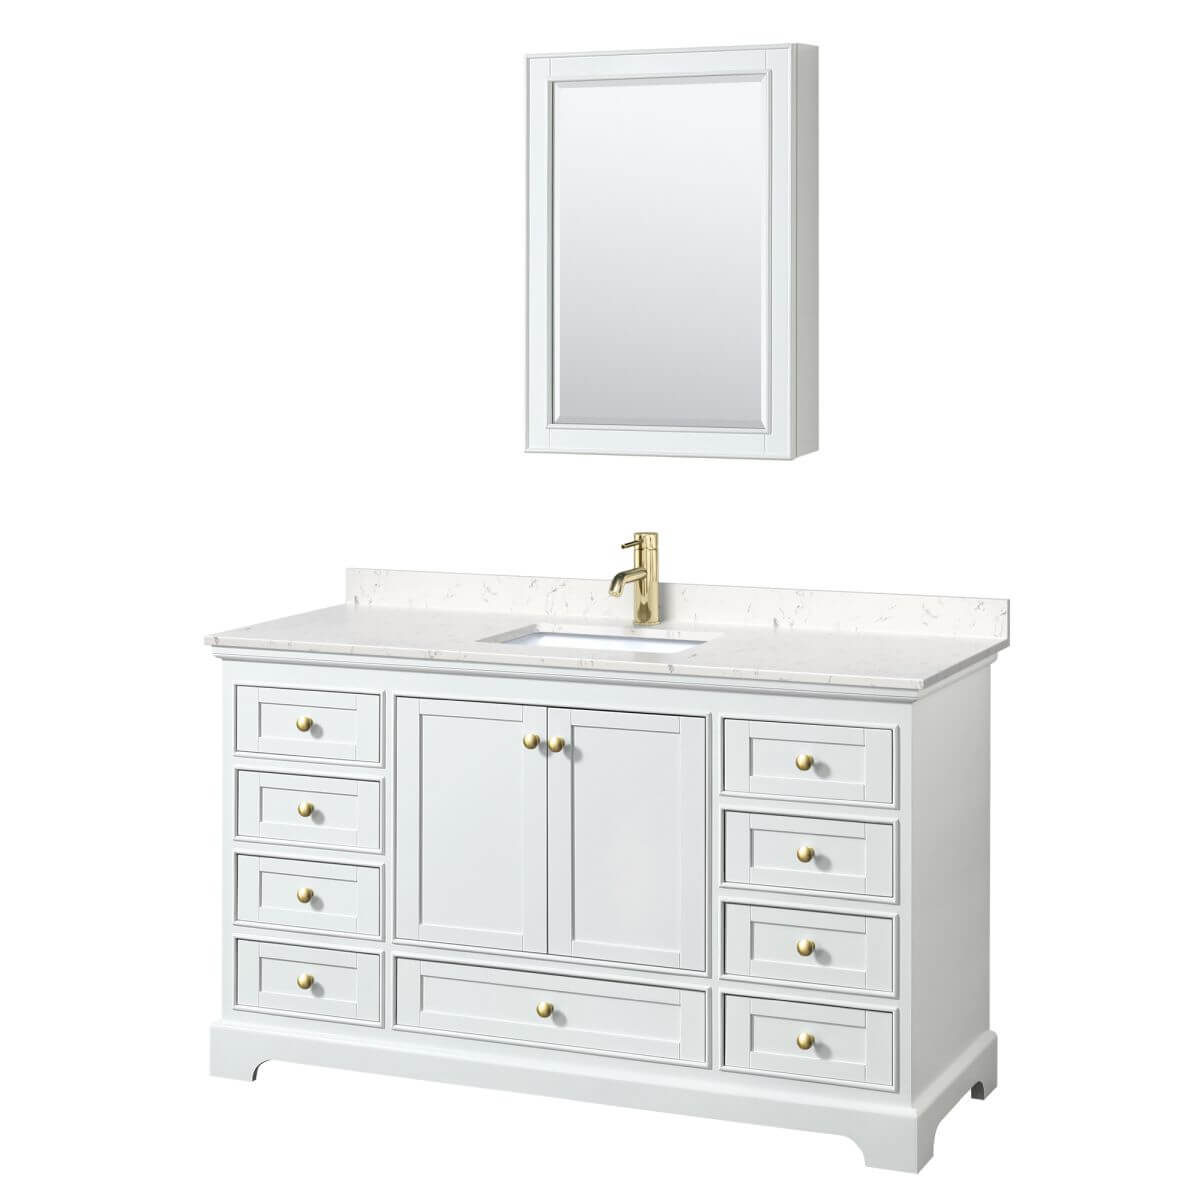 Wyndham Collection Deborah 60 inch Single Bathroom Vanity in White with Carrara Cultured Marble Countertop, Undermount Square Sink, Brushed Gold Trim and Medicine Cabinet - WCS202060SWGC2UNSMED